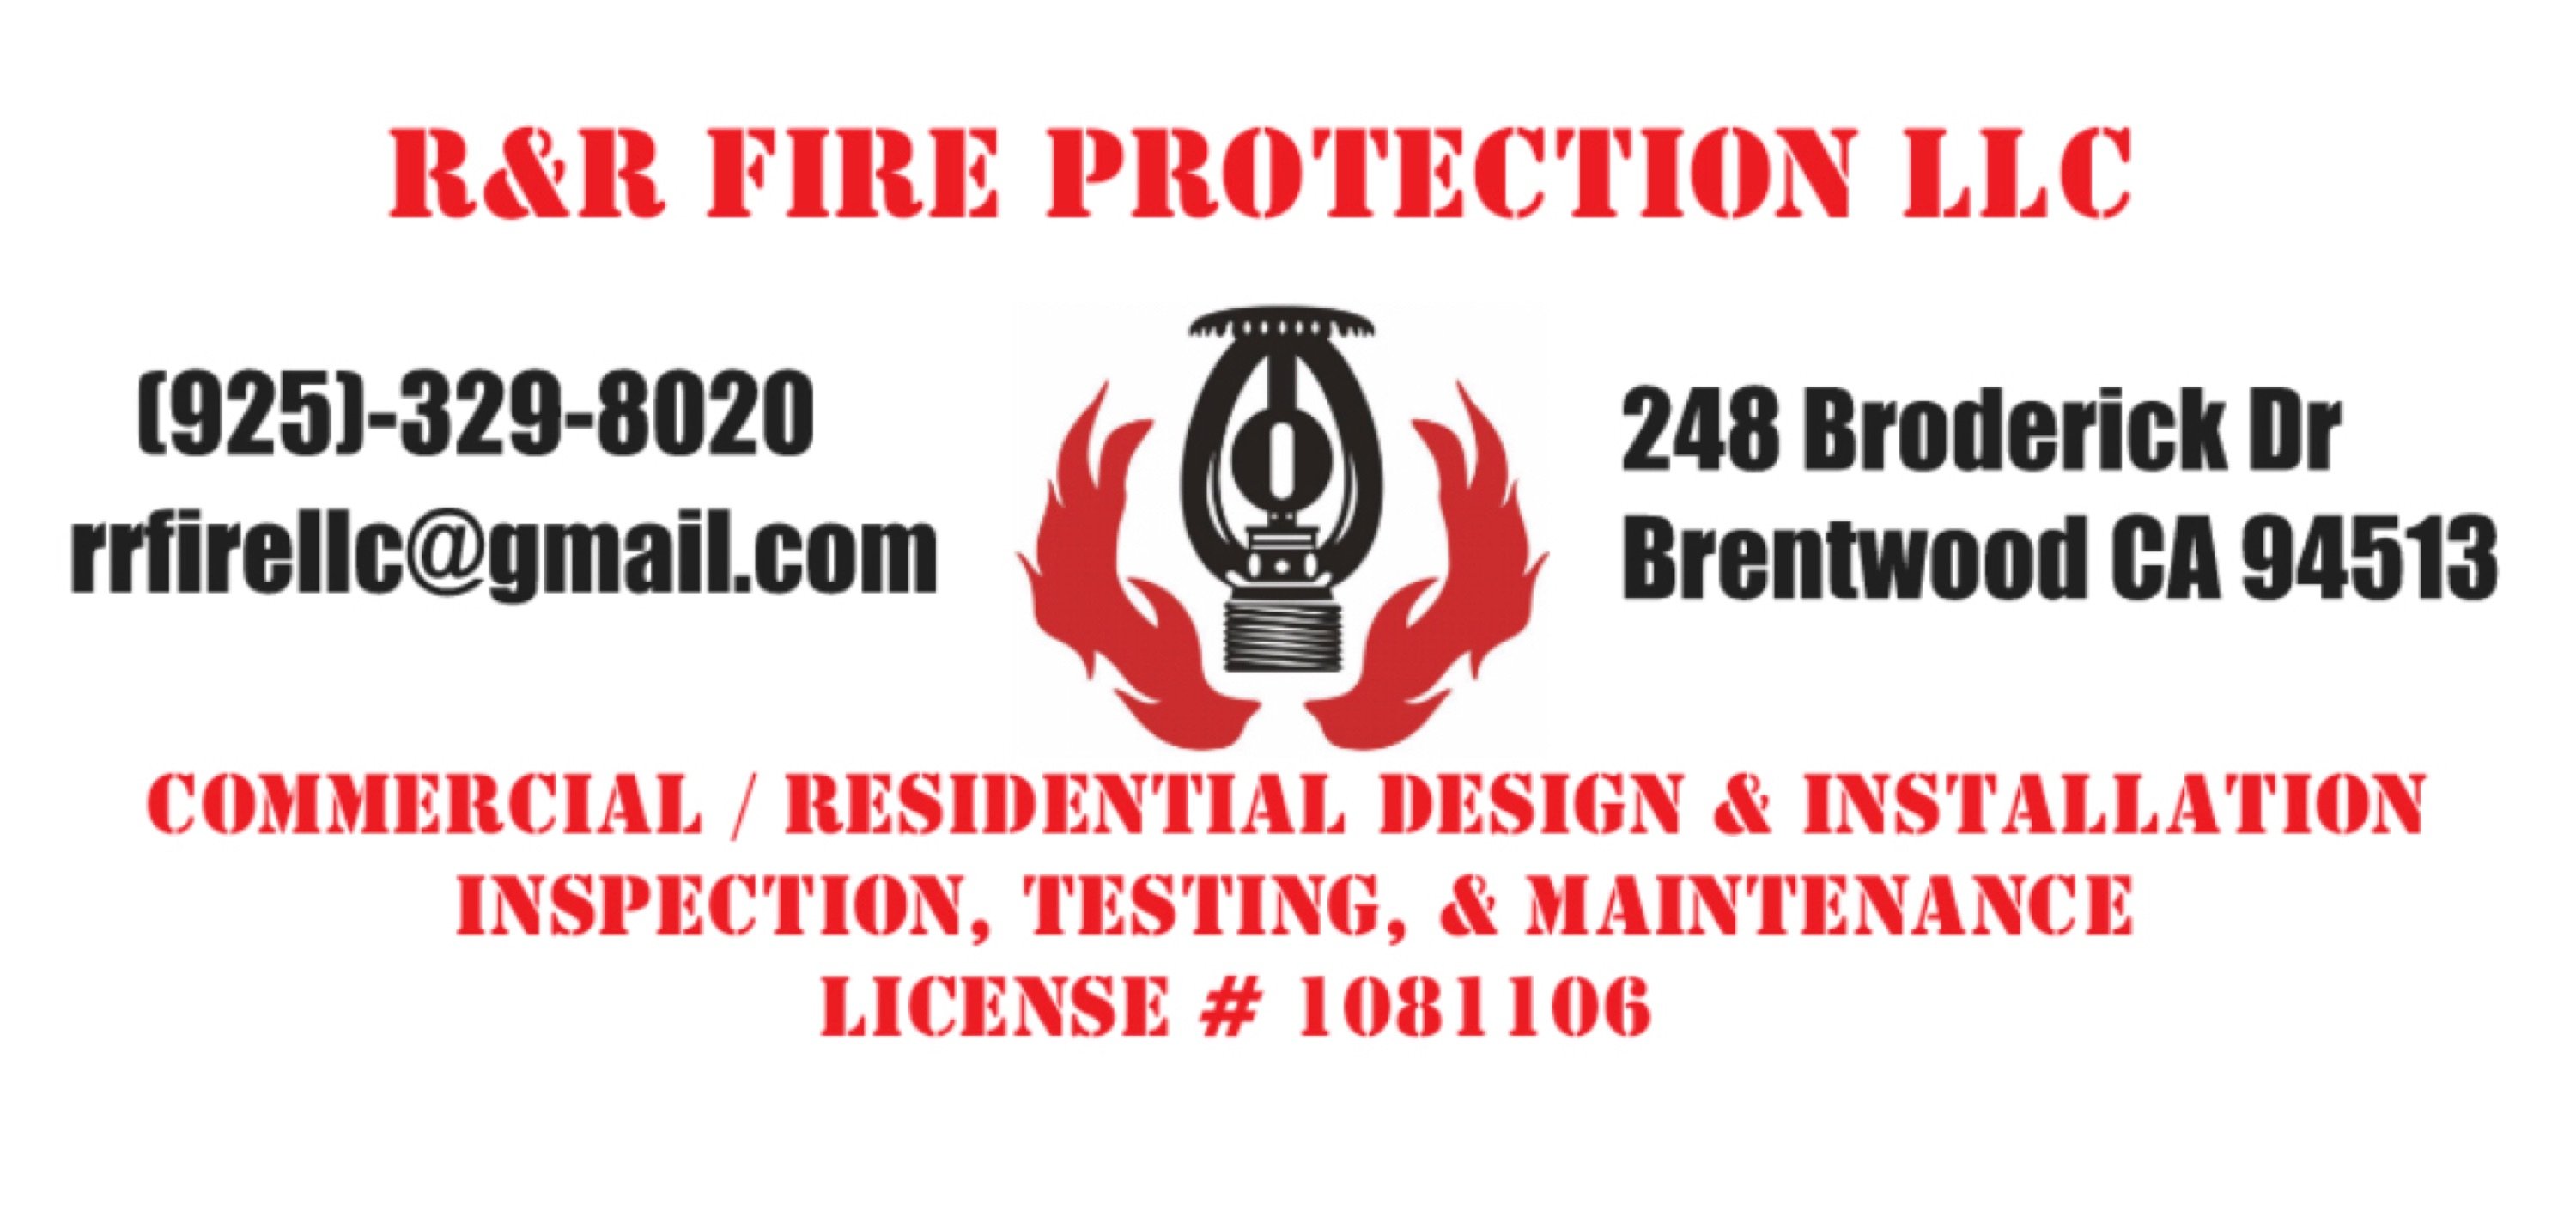 R&R Fire Protection Logo